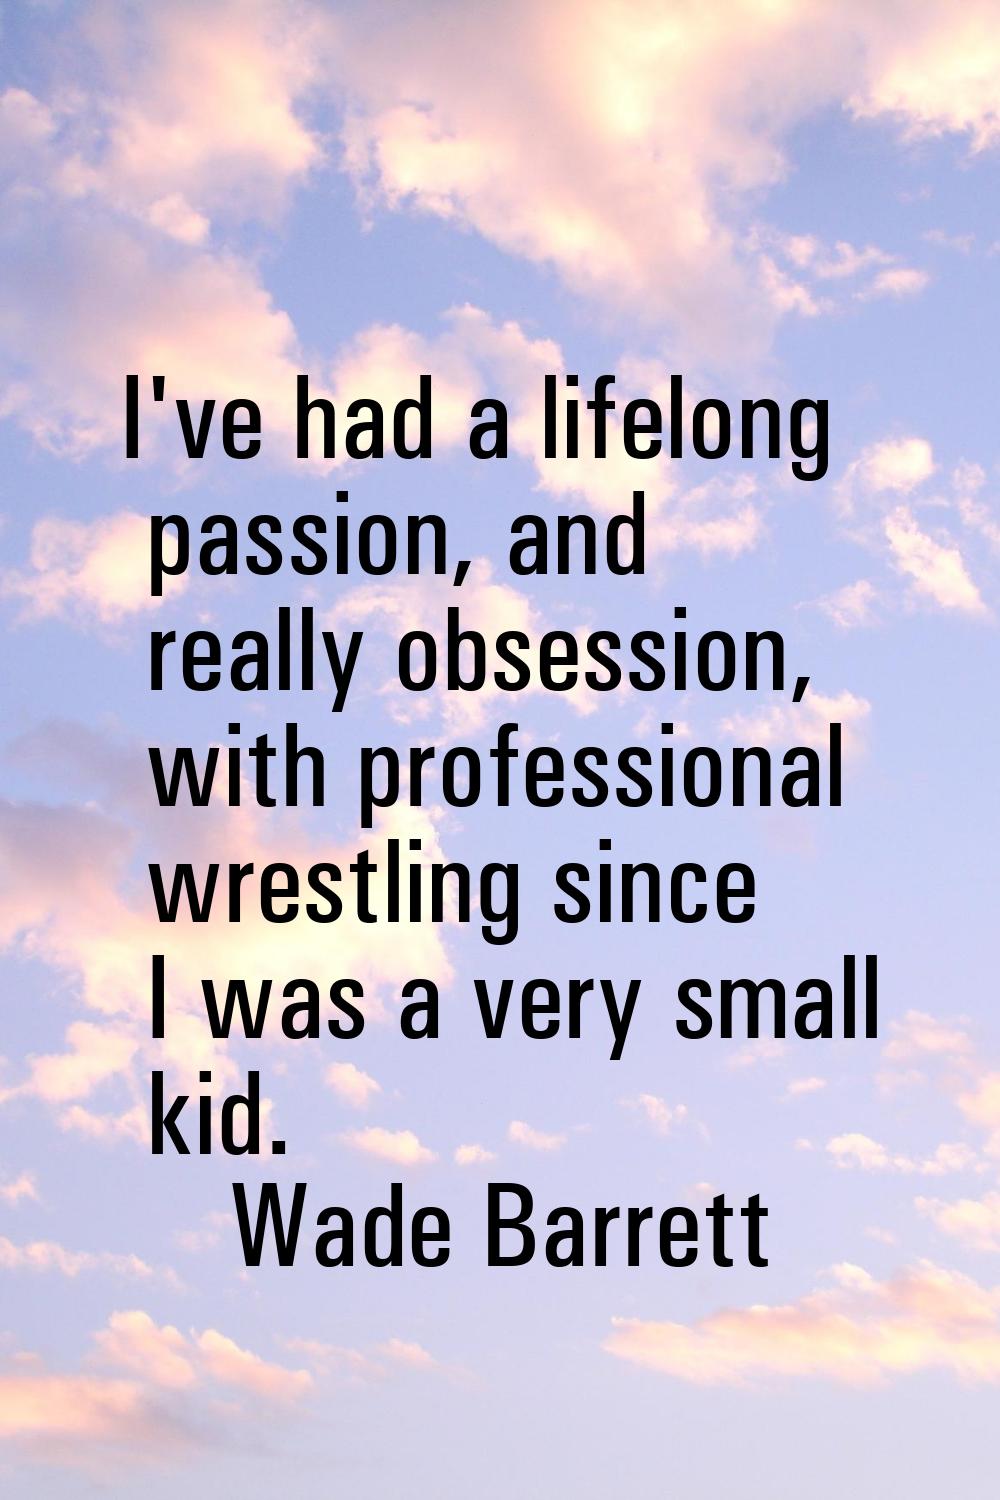 I've had a lifelong passion, and really obsession, with professional wrestling since I was a very s